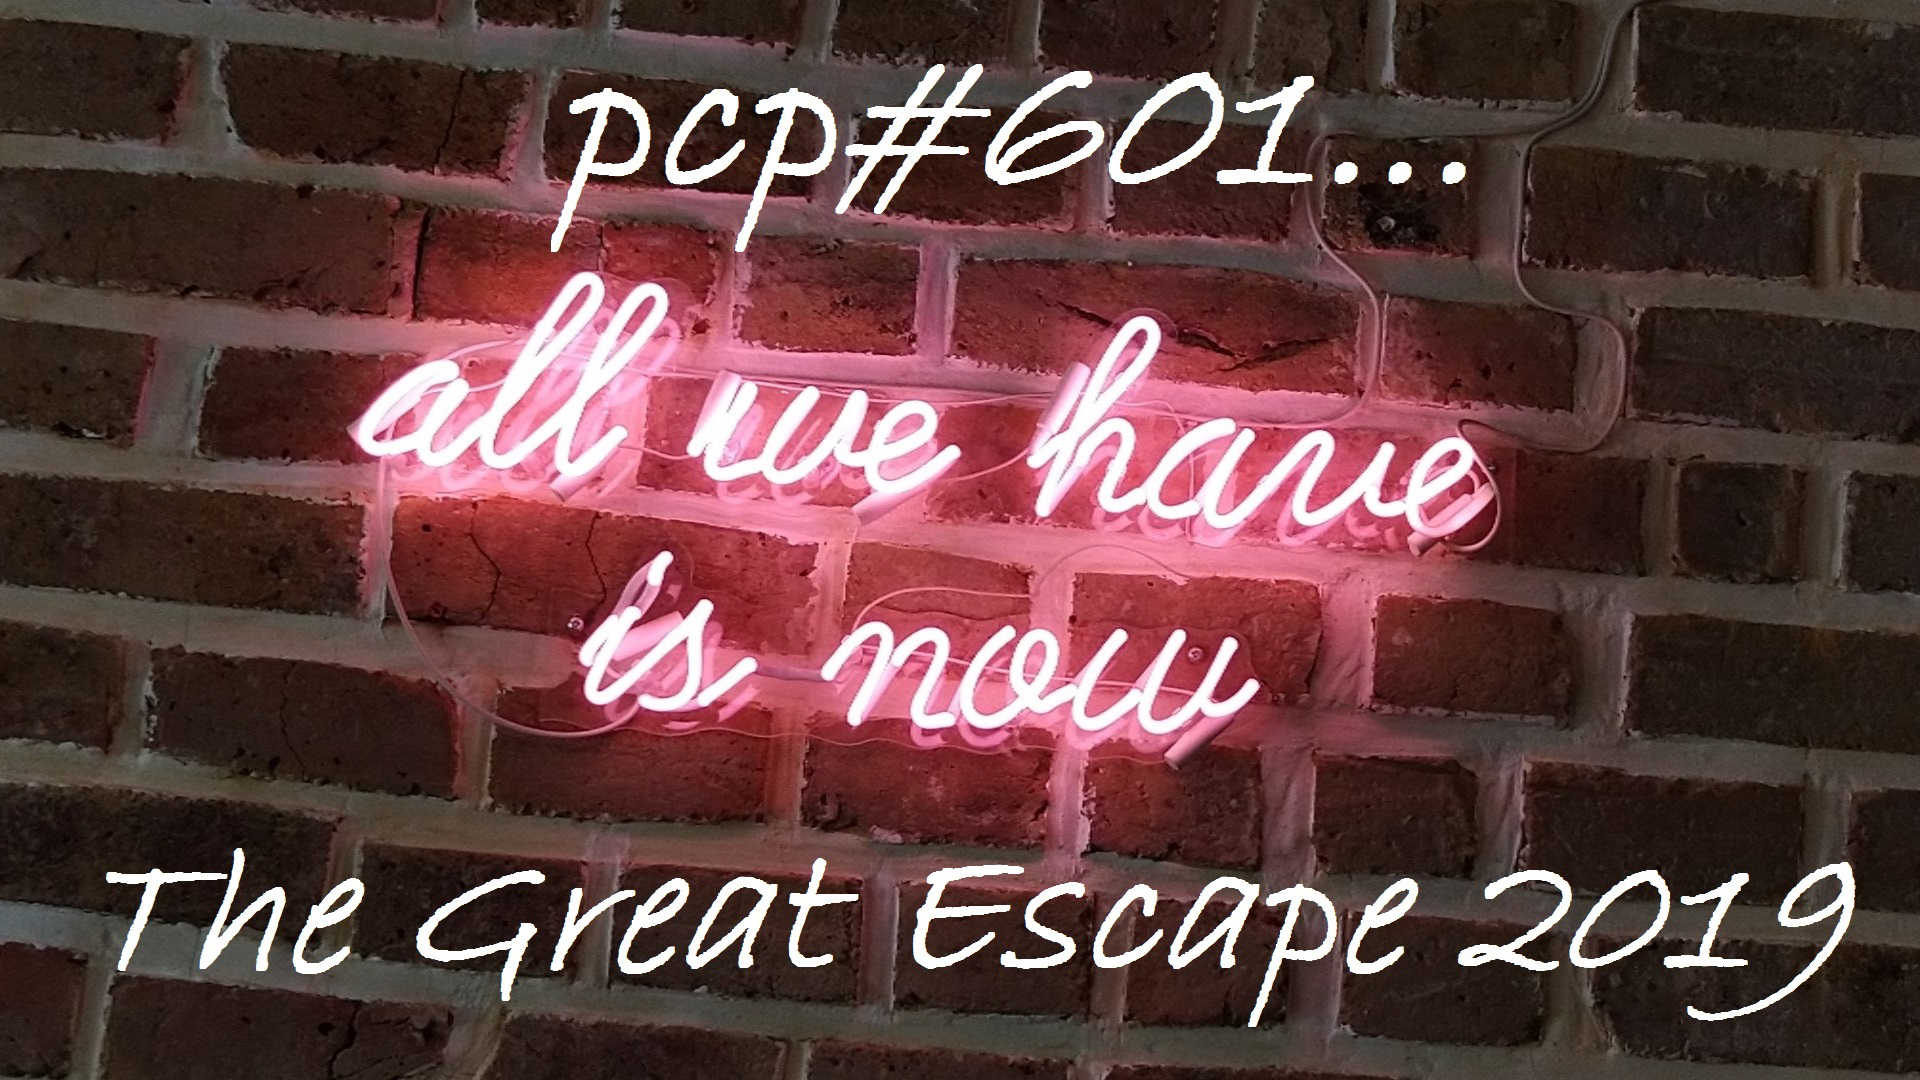 PCP#601... All We Have Is Now ... The Great Escape 2019...